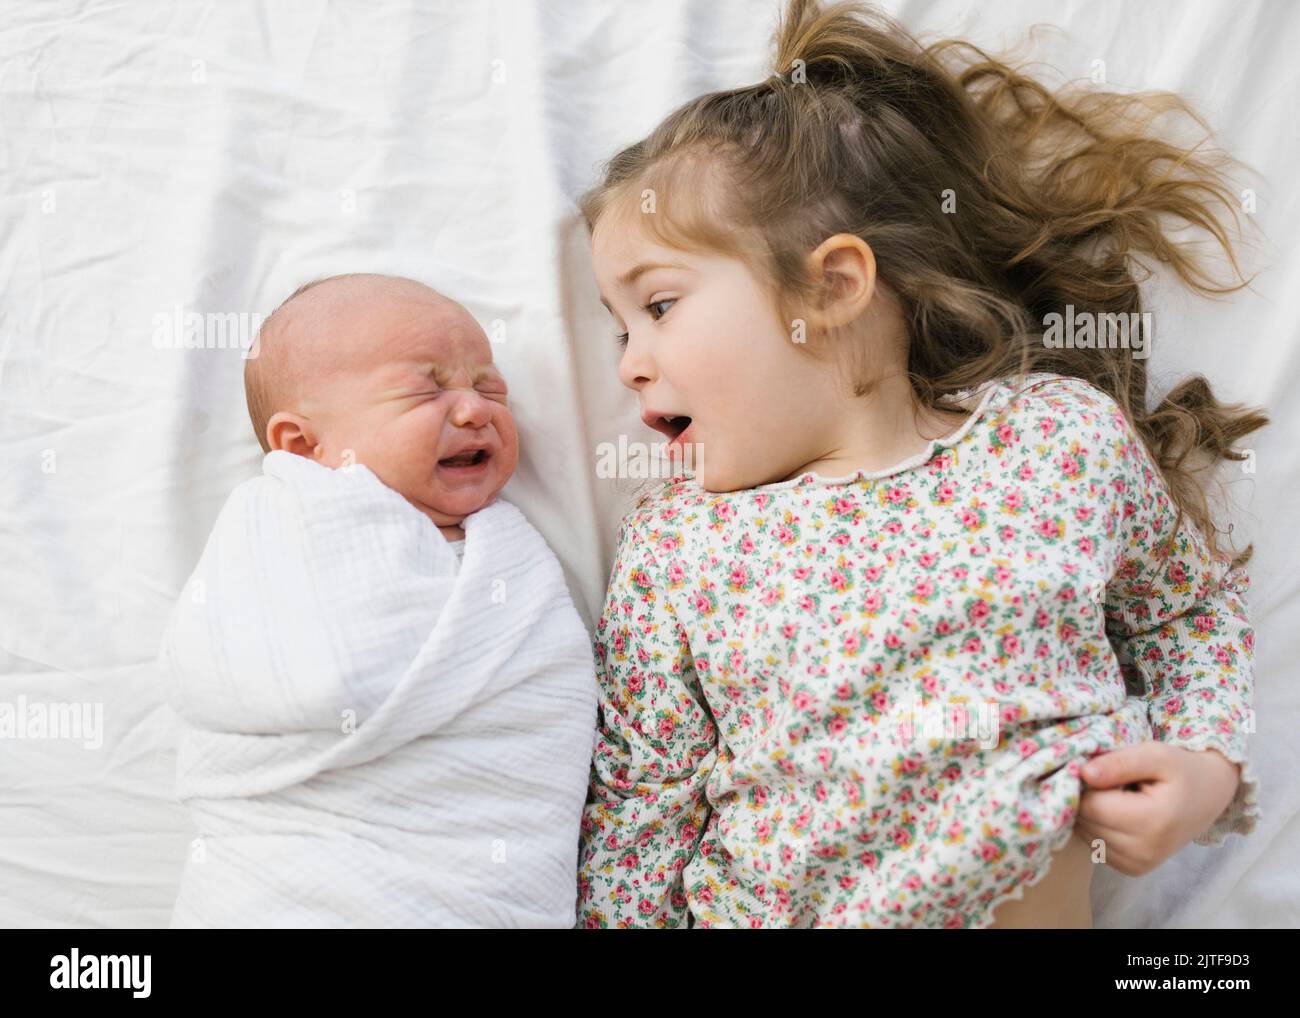 Overhead view of girl (2-3) with newborn (0-1 months) brother on bed Stock Photo